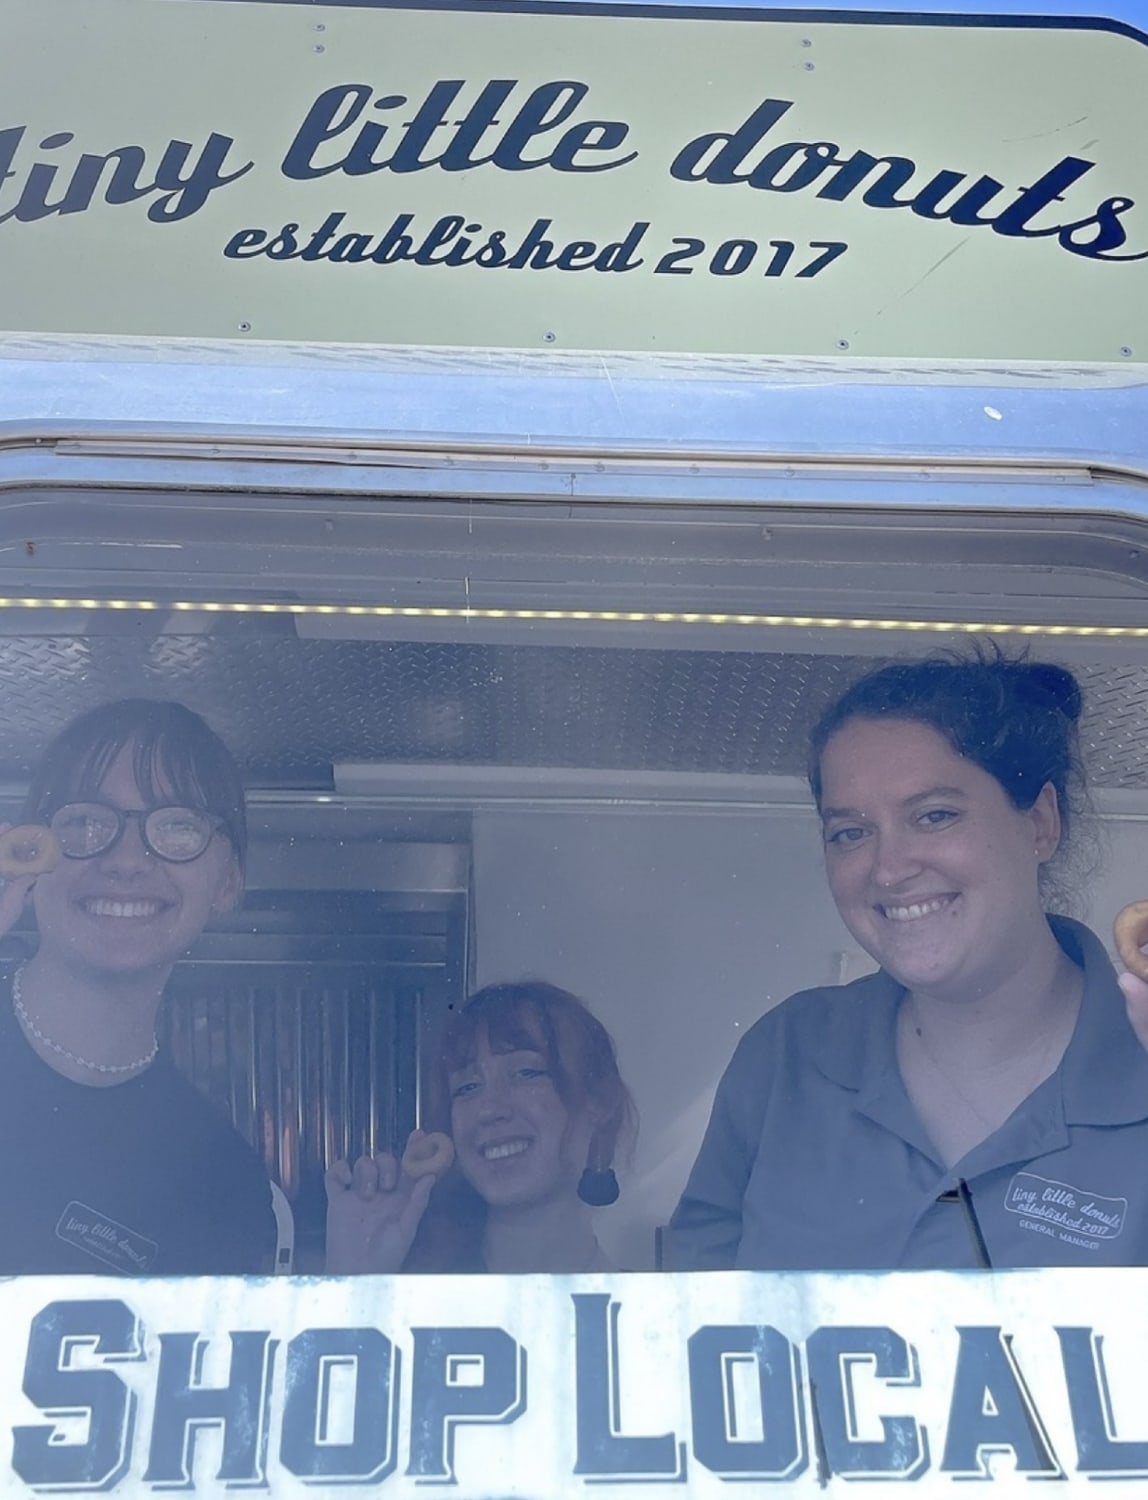 polaroid picture of tiny little donuts founders on an RV